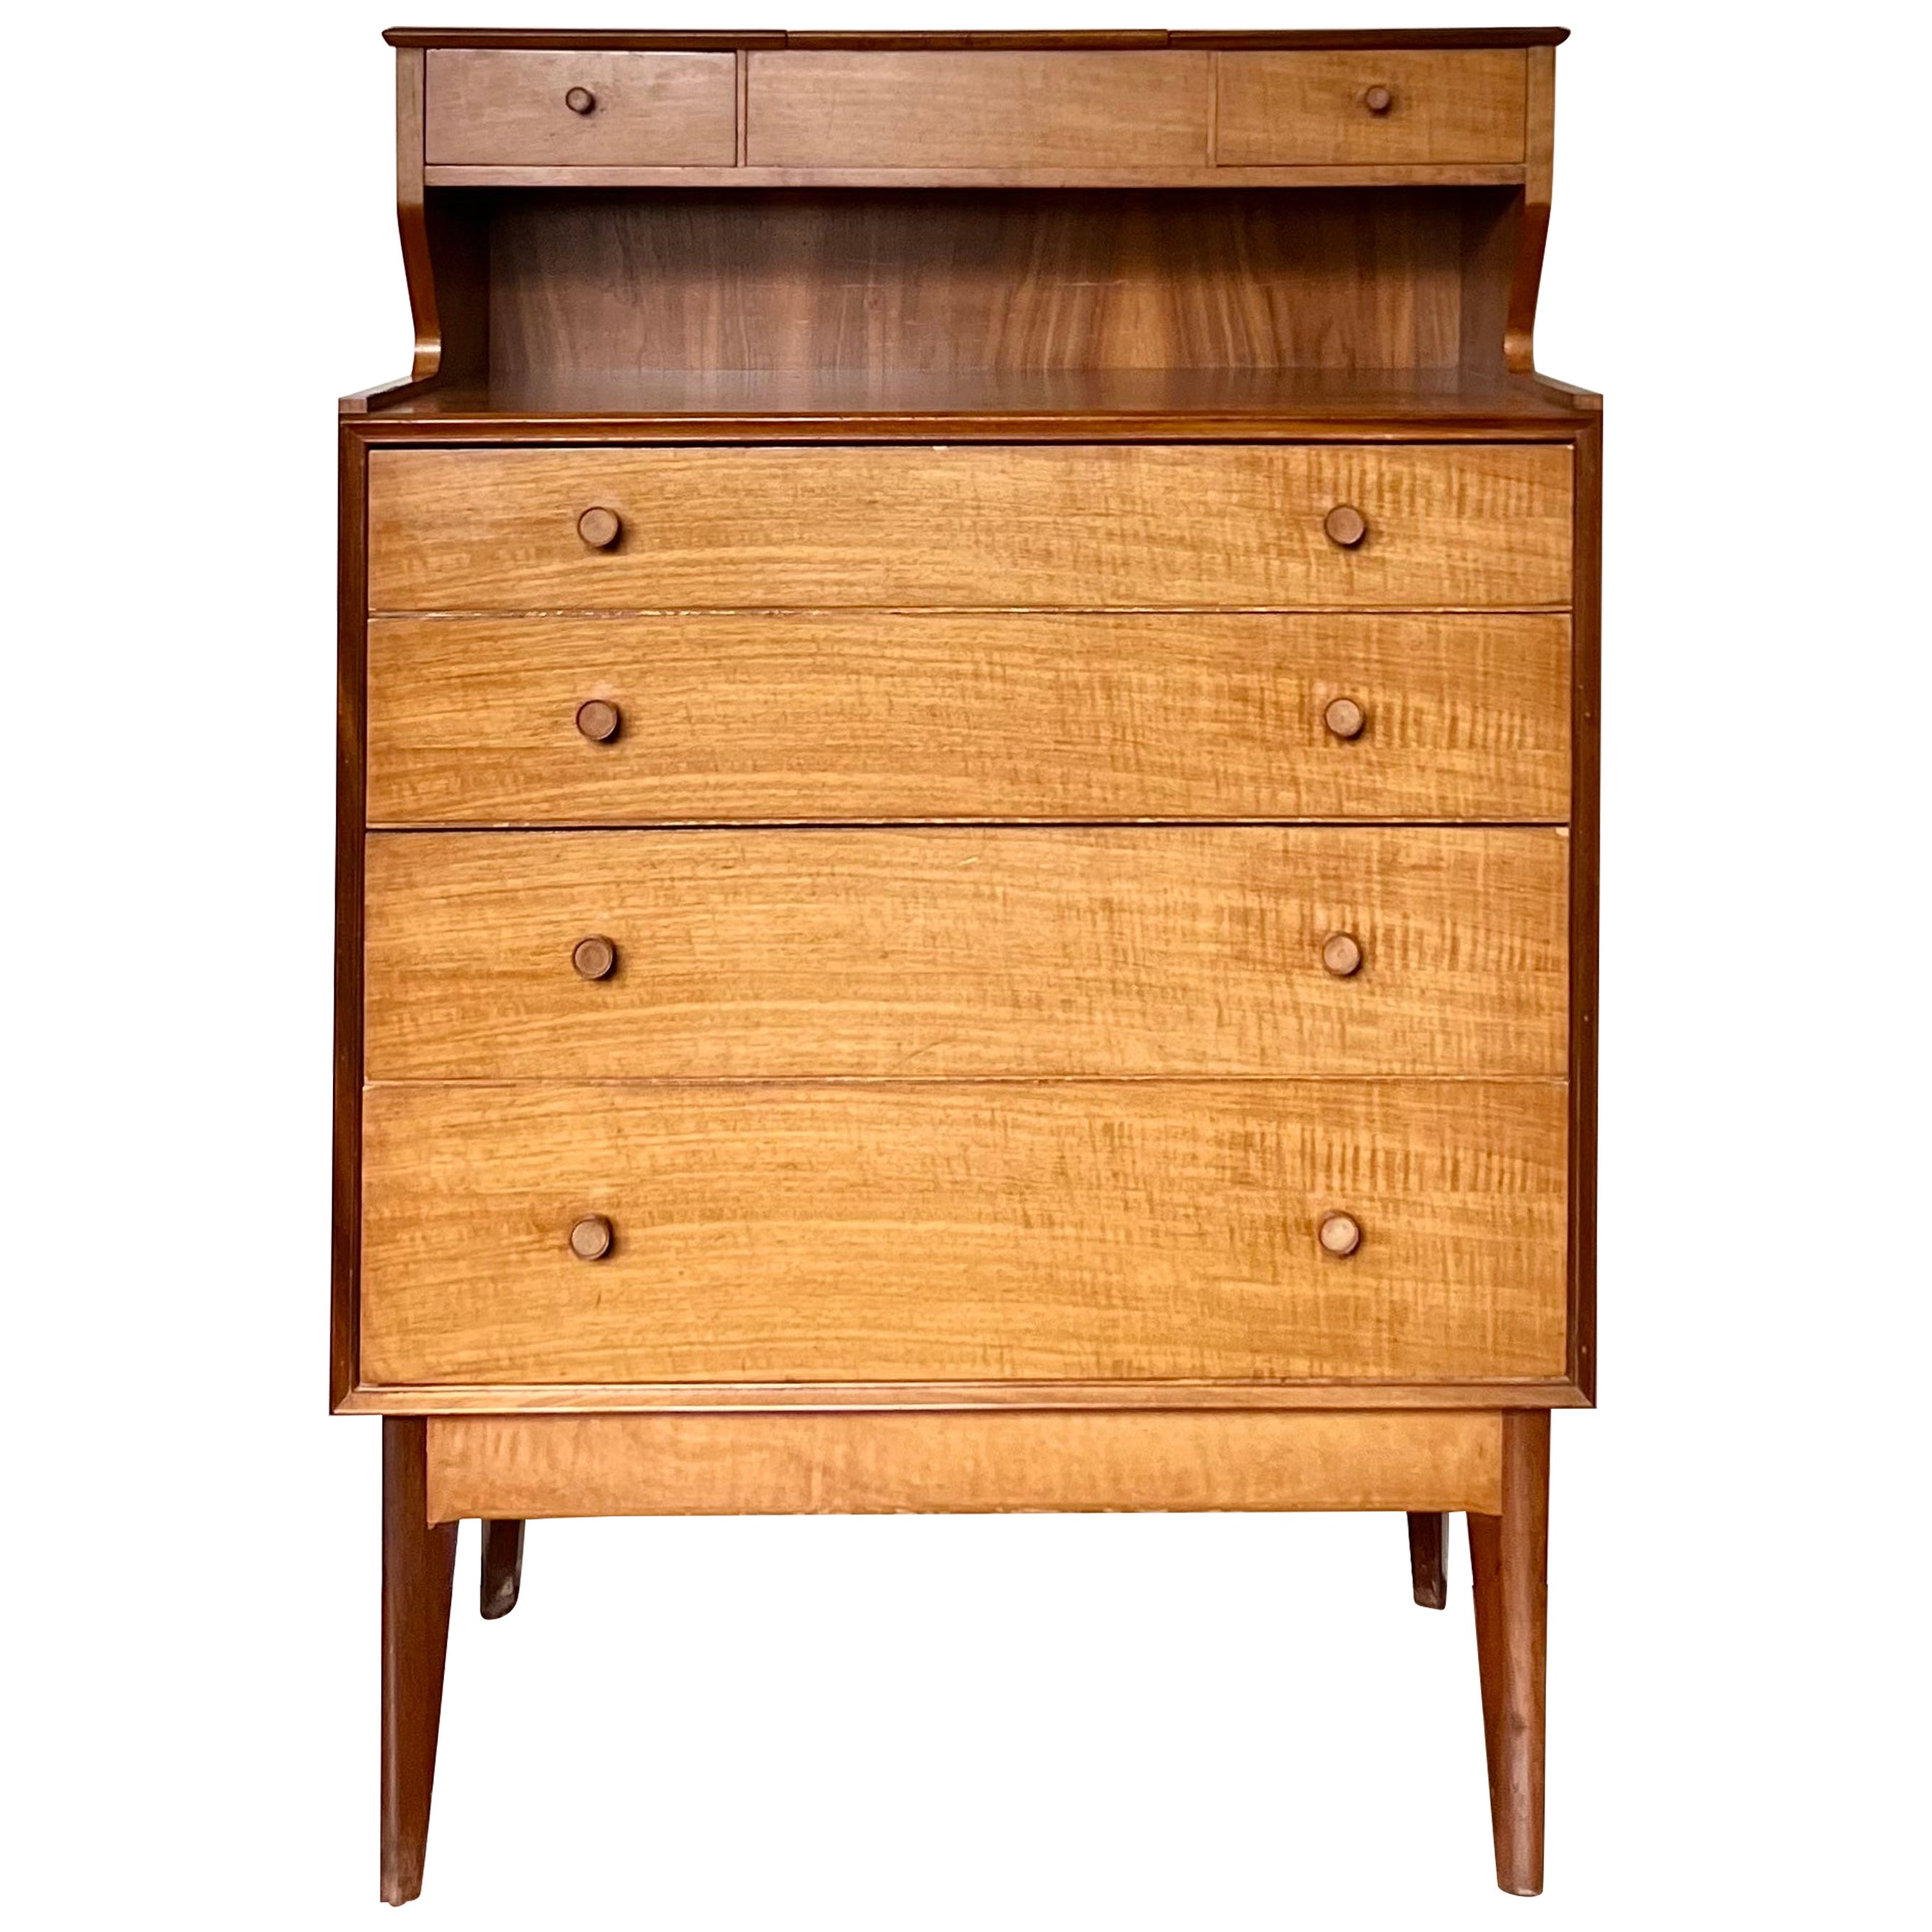 Vintage Mid-Century Modern Chest of Drawers / Vanity Dressing Table in Walnut